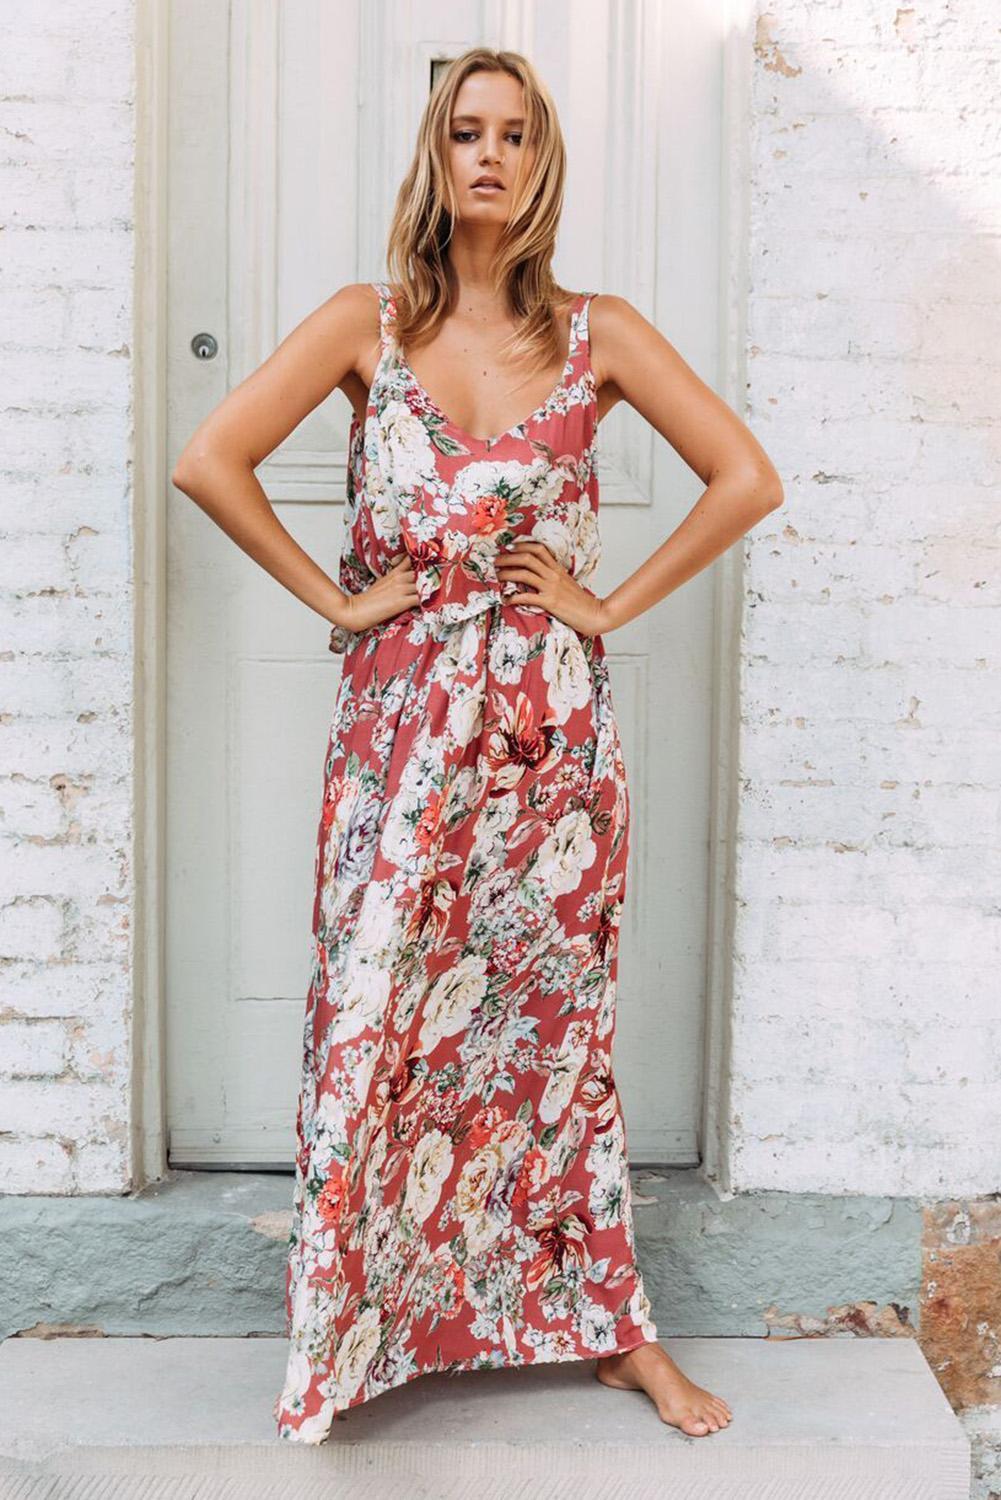 US$ 14.97 Chic Summer Boho Floral Maxi Dress in Pink Wholesale